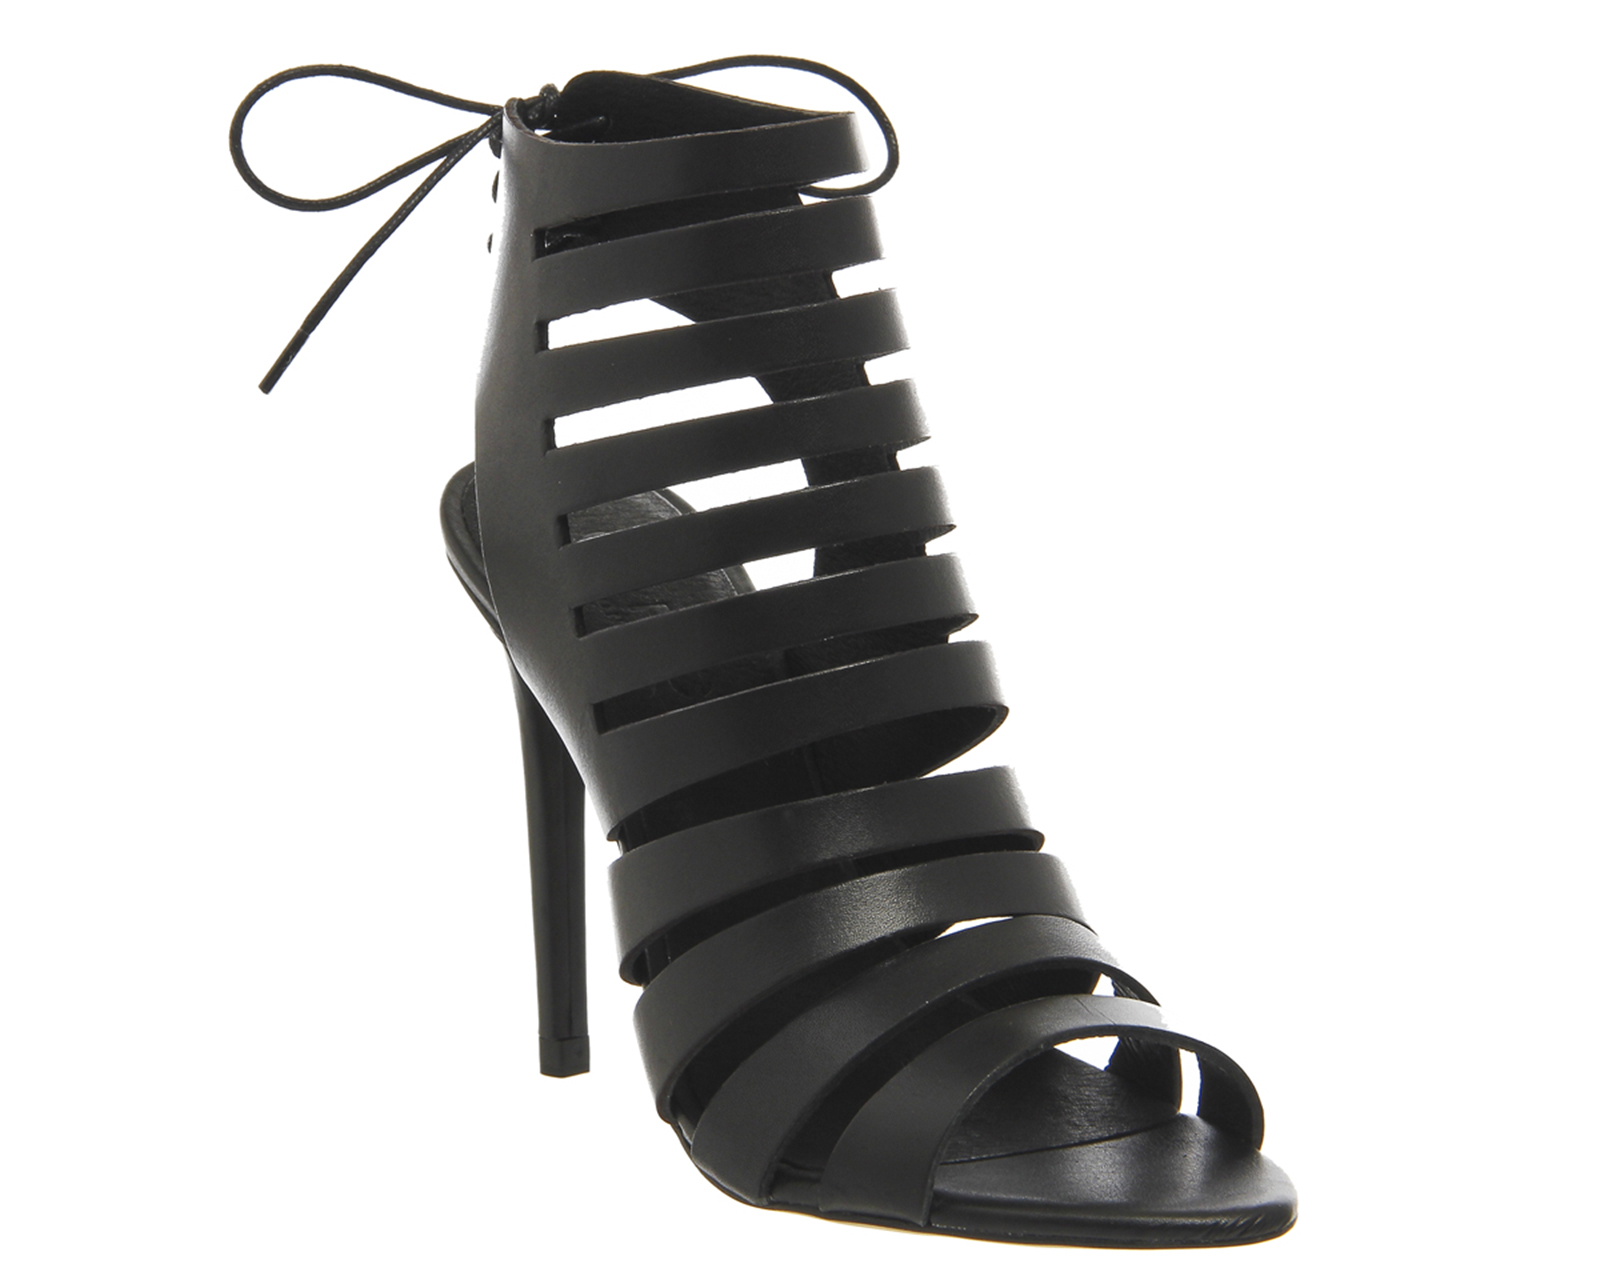 OFFICETangle Strappy Cut Out SandalBlack Leather